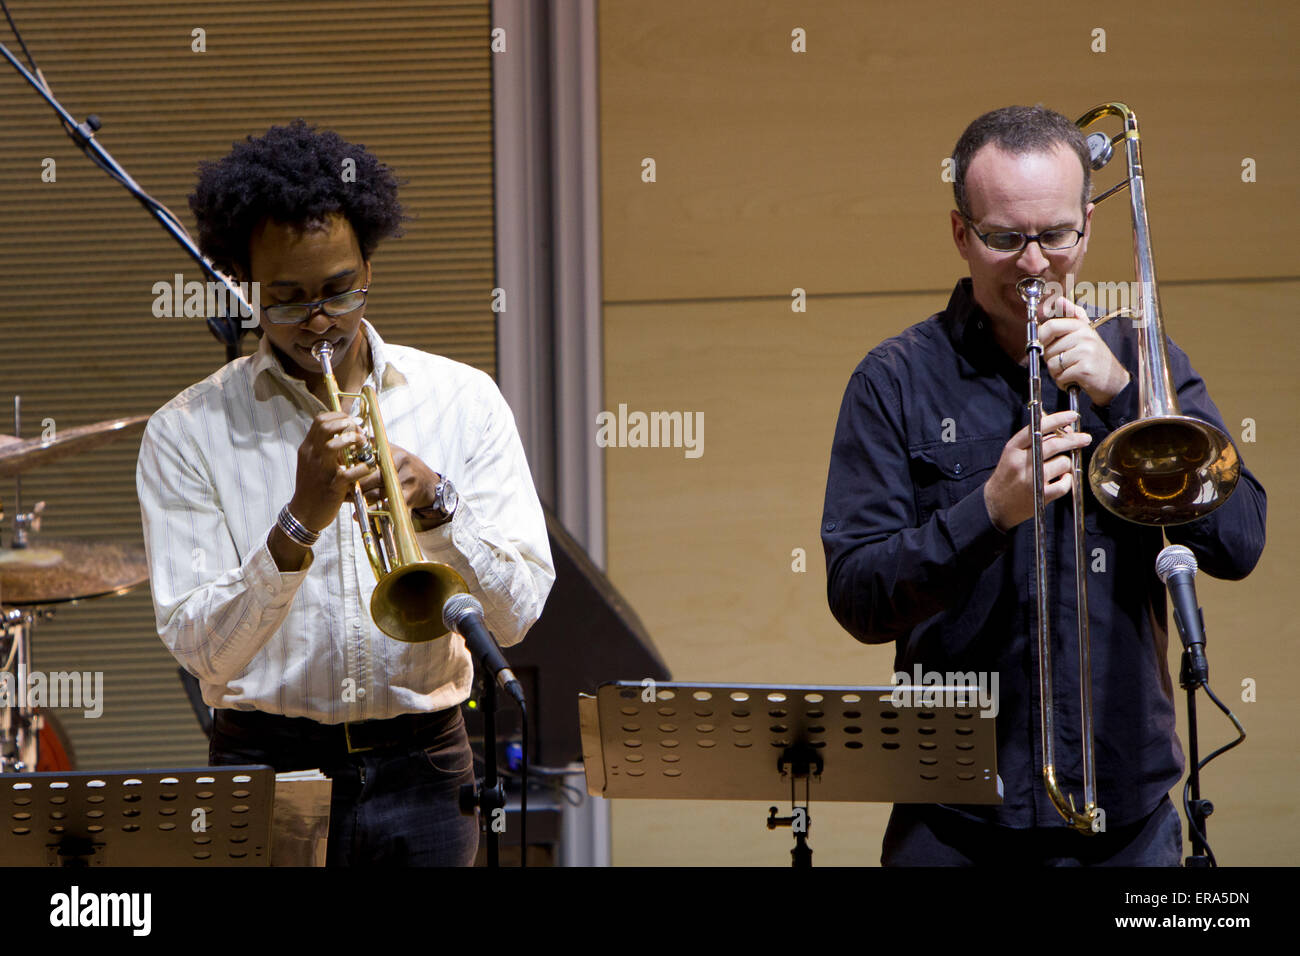 Turin, Italy, 30th May 2015. Trumpeter Jonathan Finlayson (left) and trombonist Tim Albright (right) perform during a Steve Lehman Octet concert during Torino Jazz Festival Stock Photo